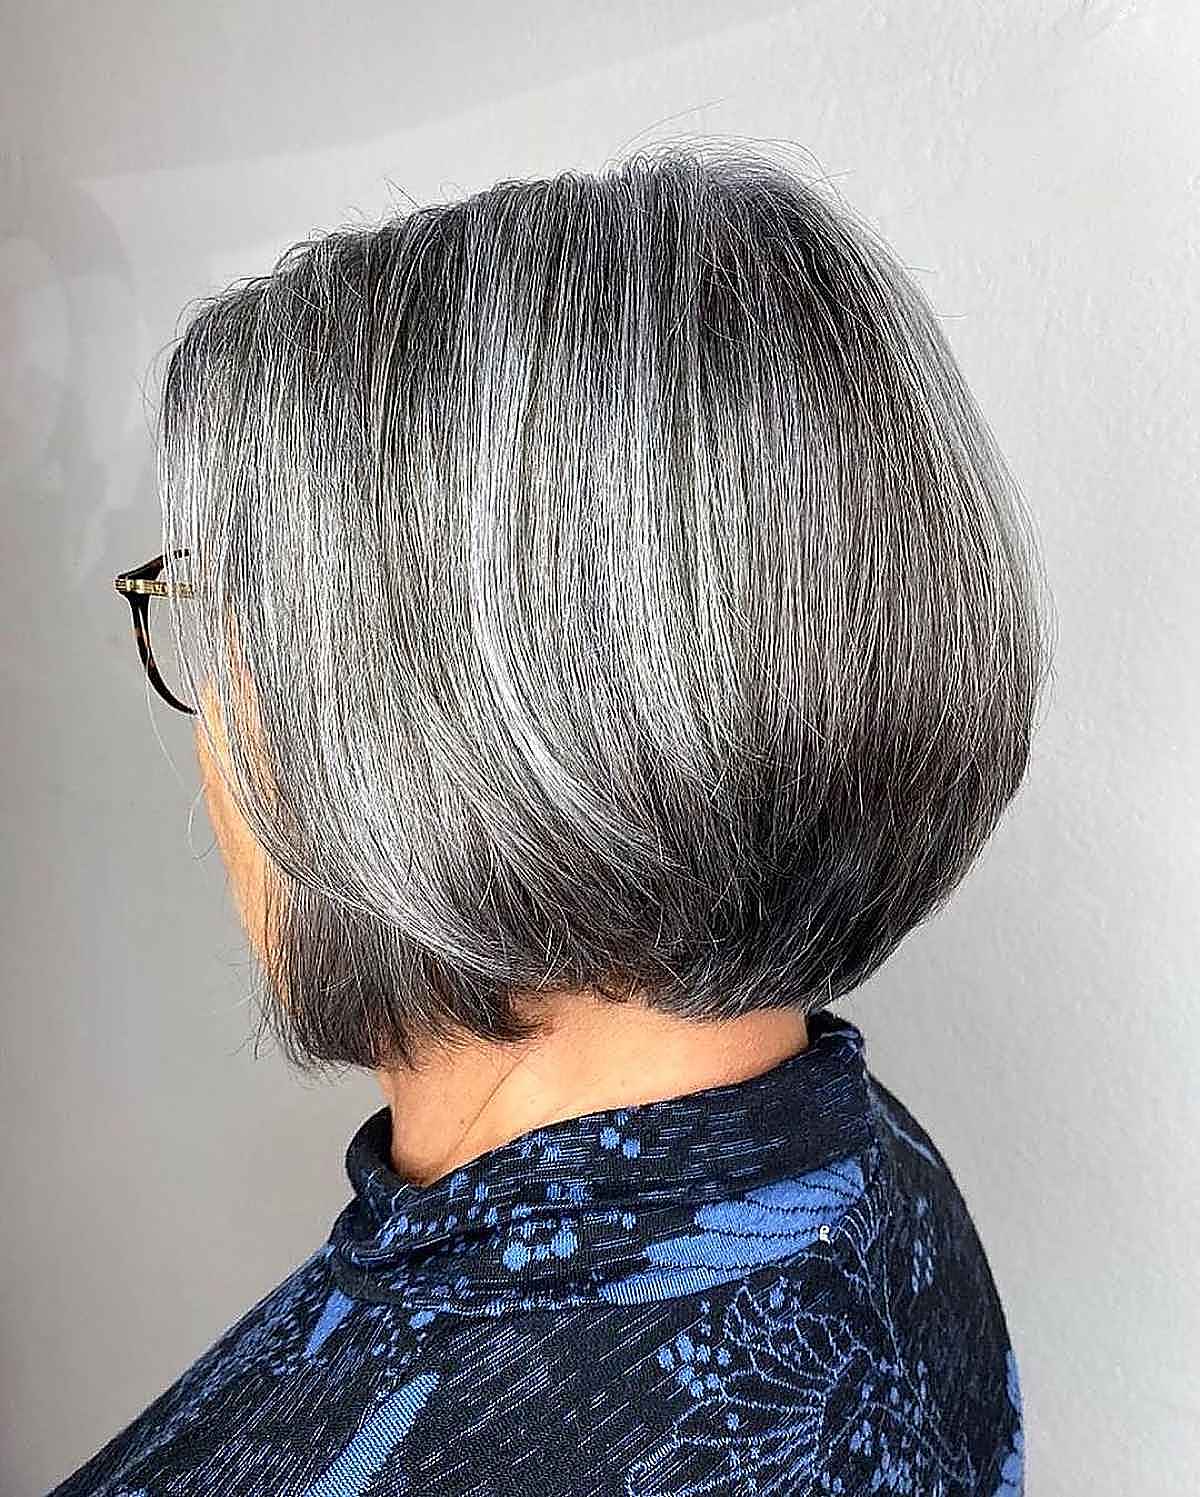 Neck-Length Stacked Bob on women over 60 with Salt-and Pepper Hair